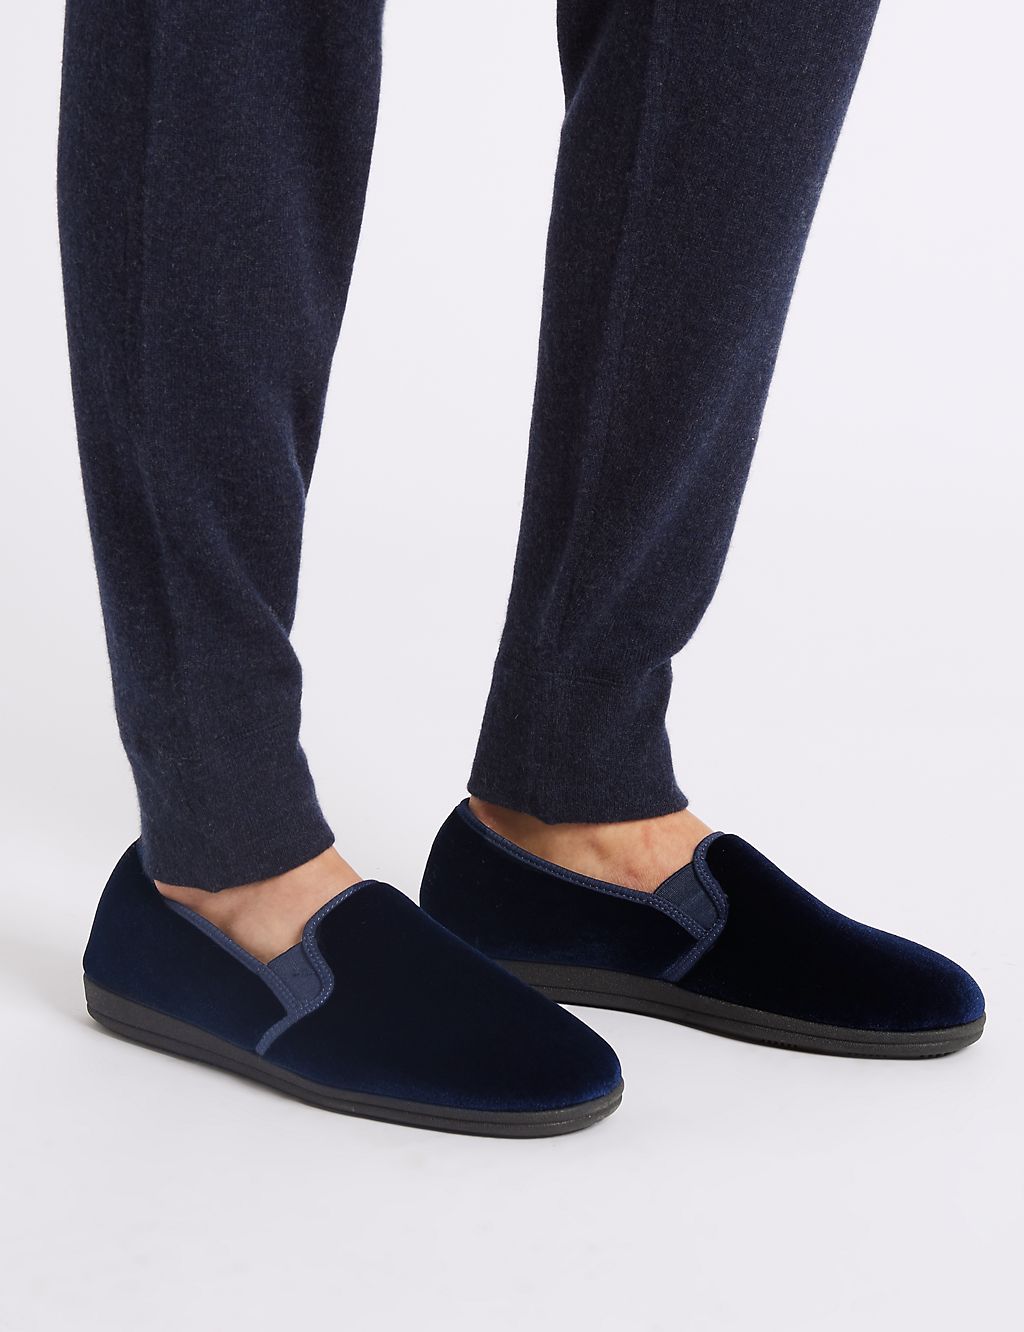 Slip-on Slippers with Freshfeet™ 3 of 6